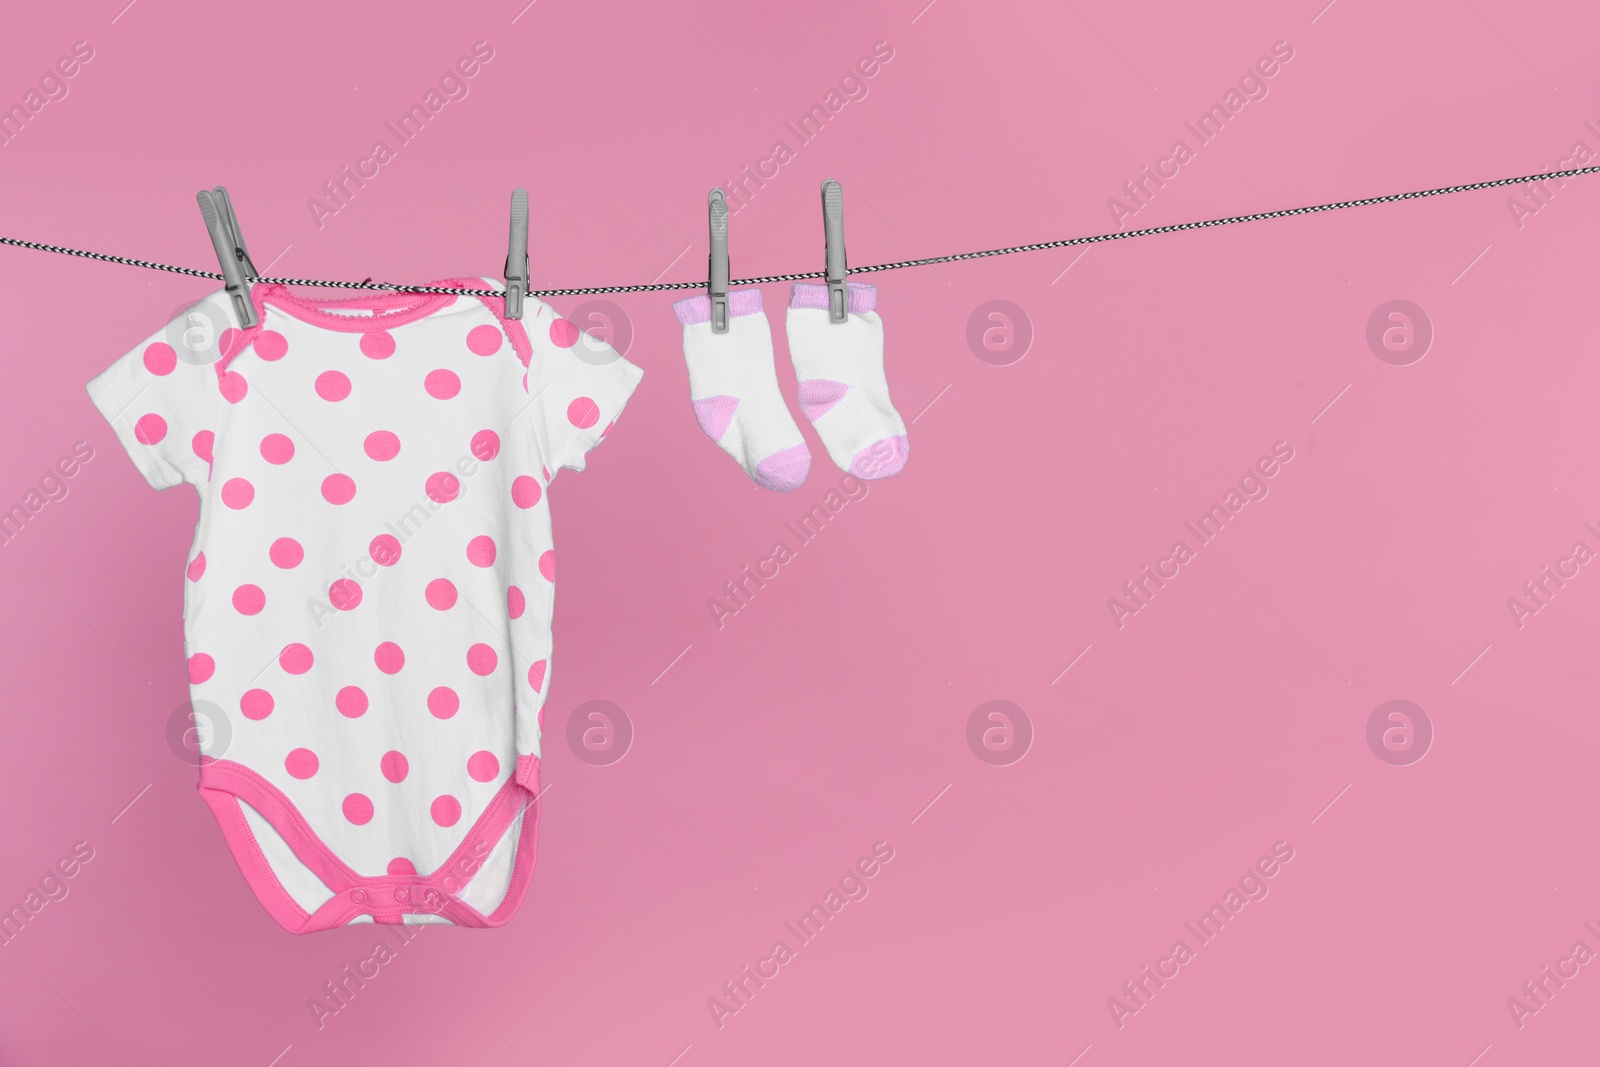 Photo of Baby onesie and socks drying on laundry line against pink background, space for text